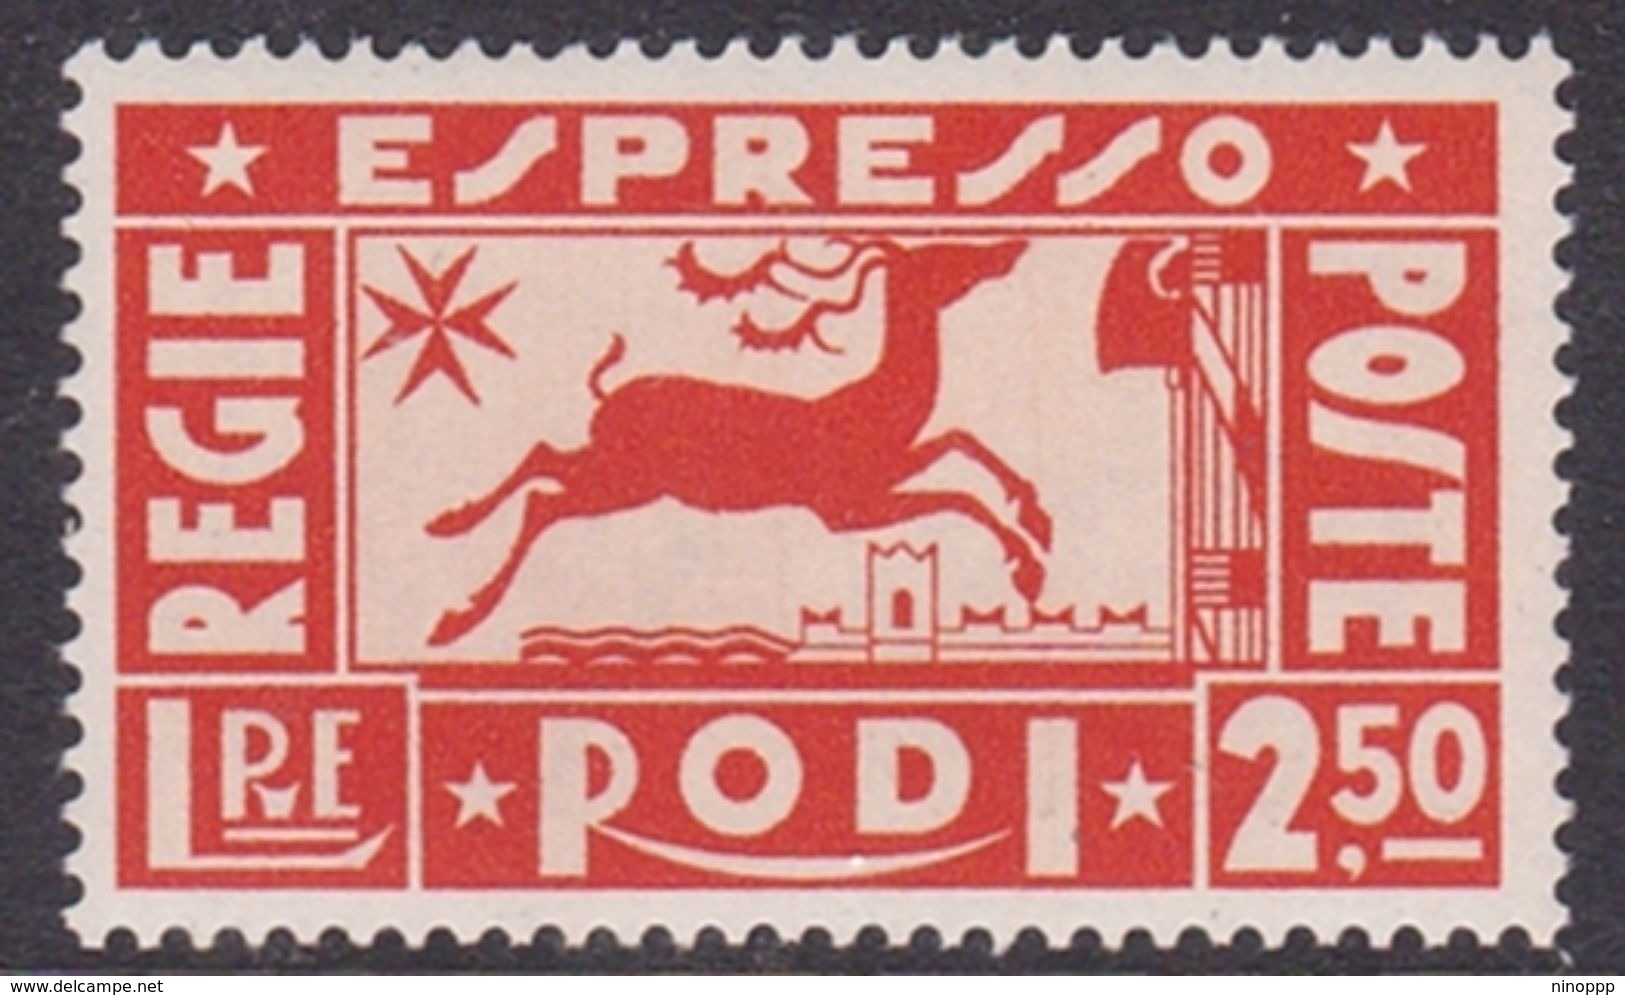 Italy-Colonies And Territories-Aegean General Issue-Rodi Special Delivery Stamp S2 1936 Deer,lire 2,50 Orange MH - General Issues